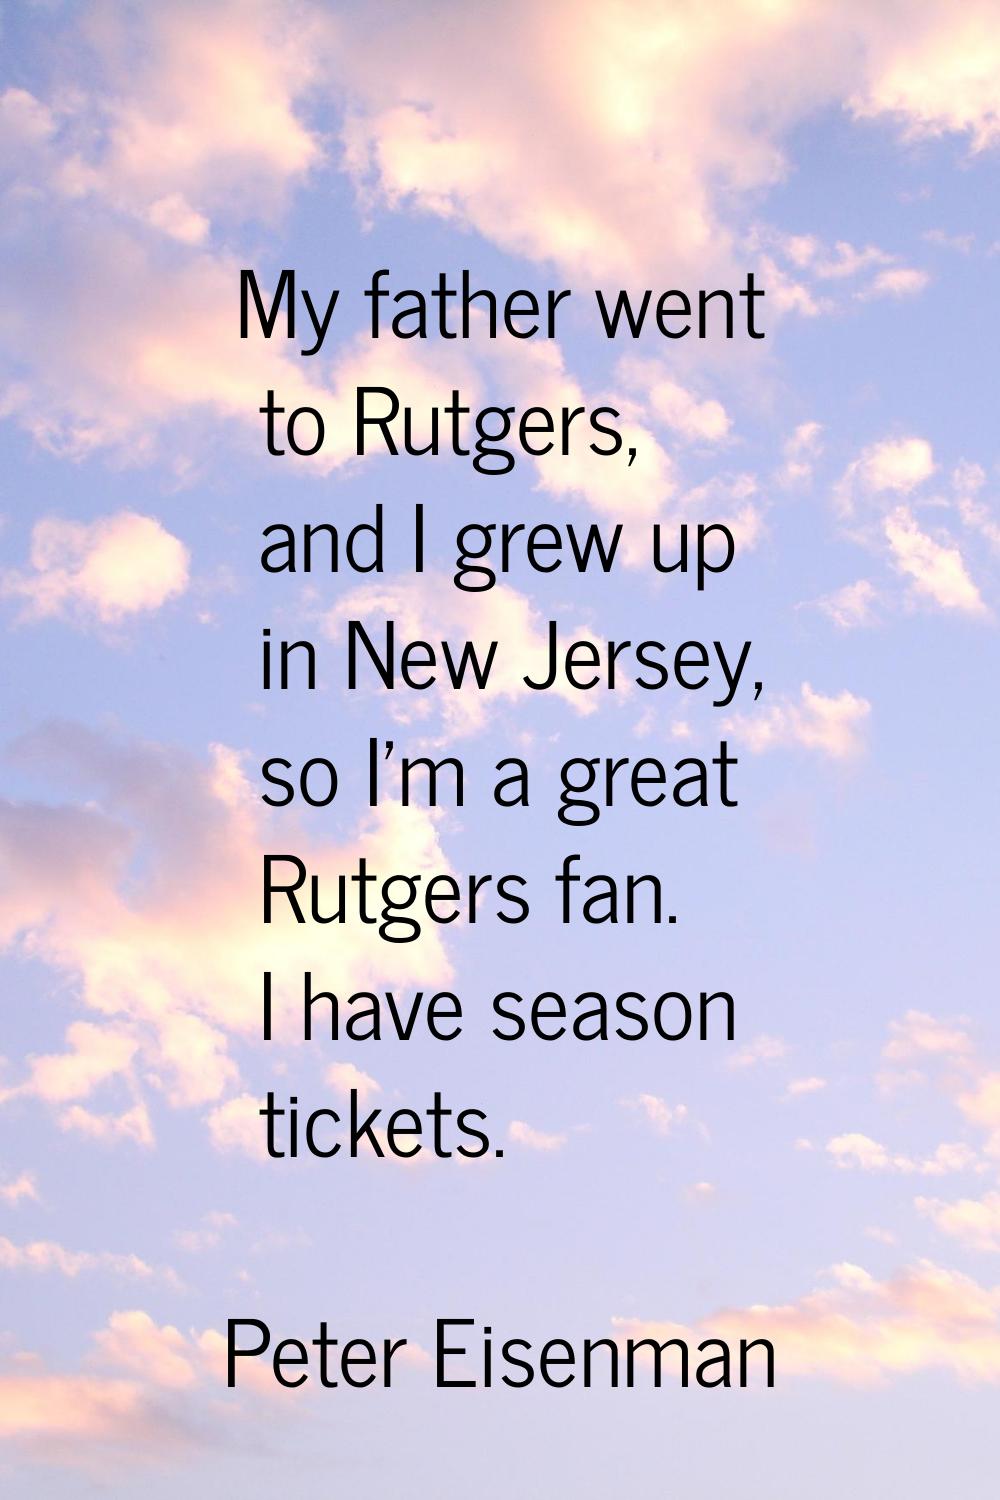 My father went to Rutgers, and I grew up in New Jersey, so I'm a great Rutgers fan. I have season t